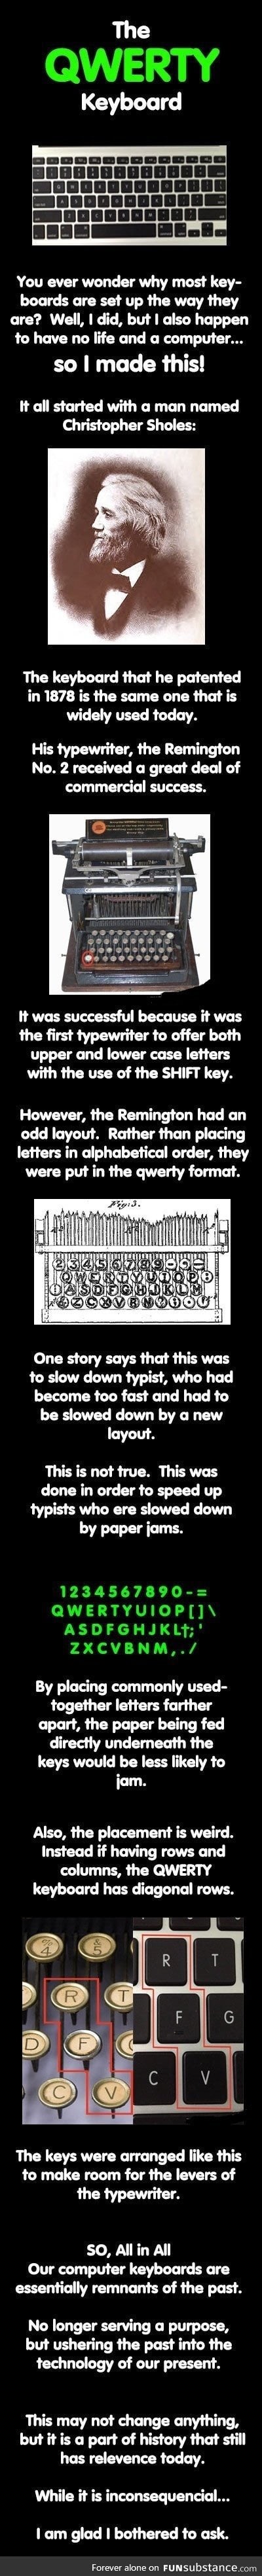 Facts about the QWERTY Keyboard